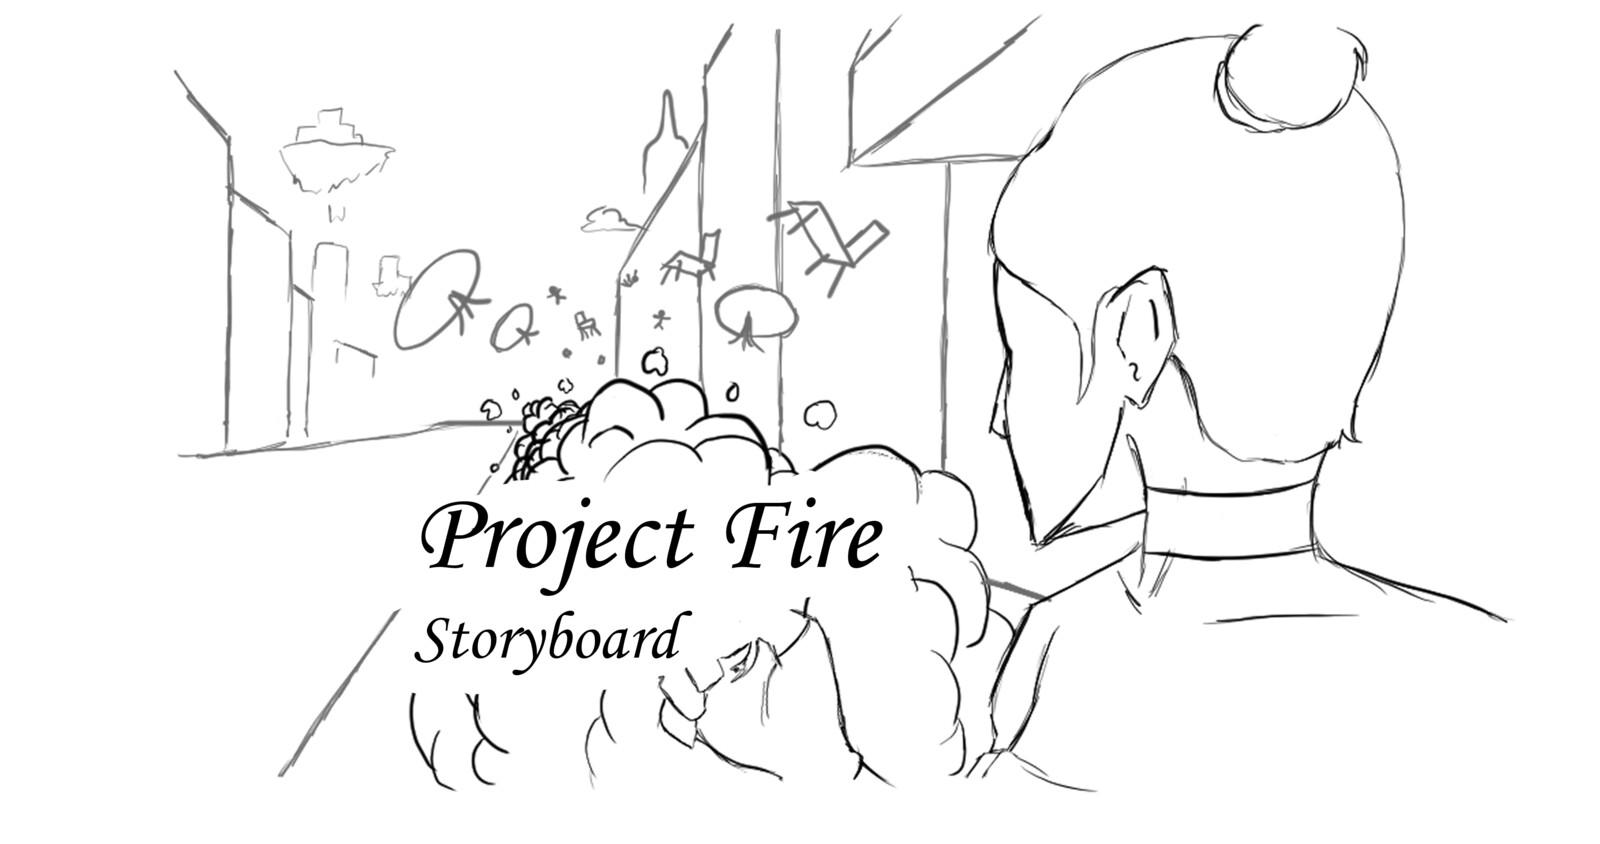 Project Fire - Storyboard Page 4